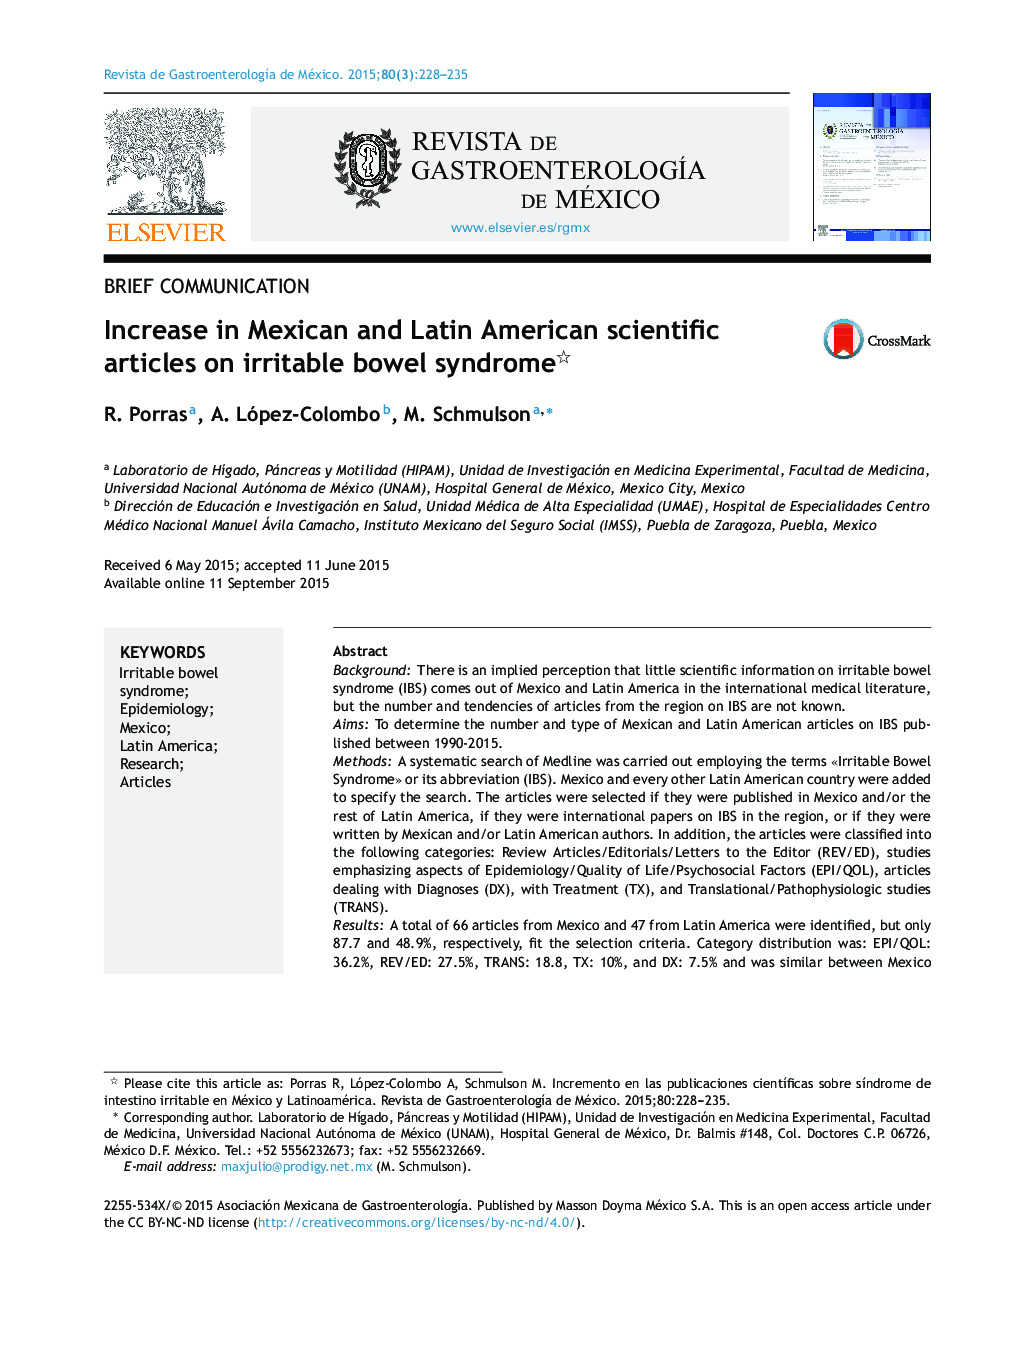 Increase in Mexican and Latin American scientific articles on irritable bowel syndrome 